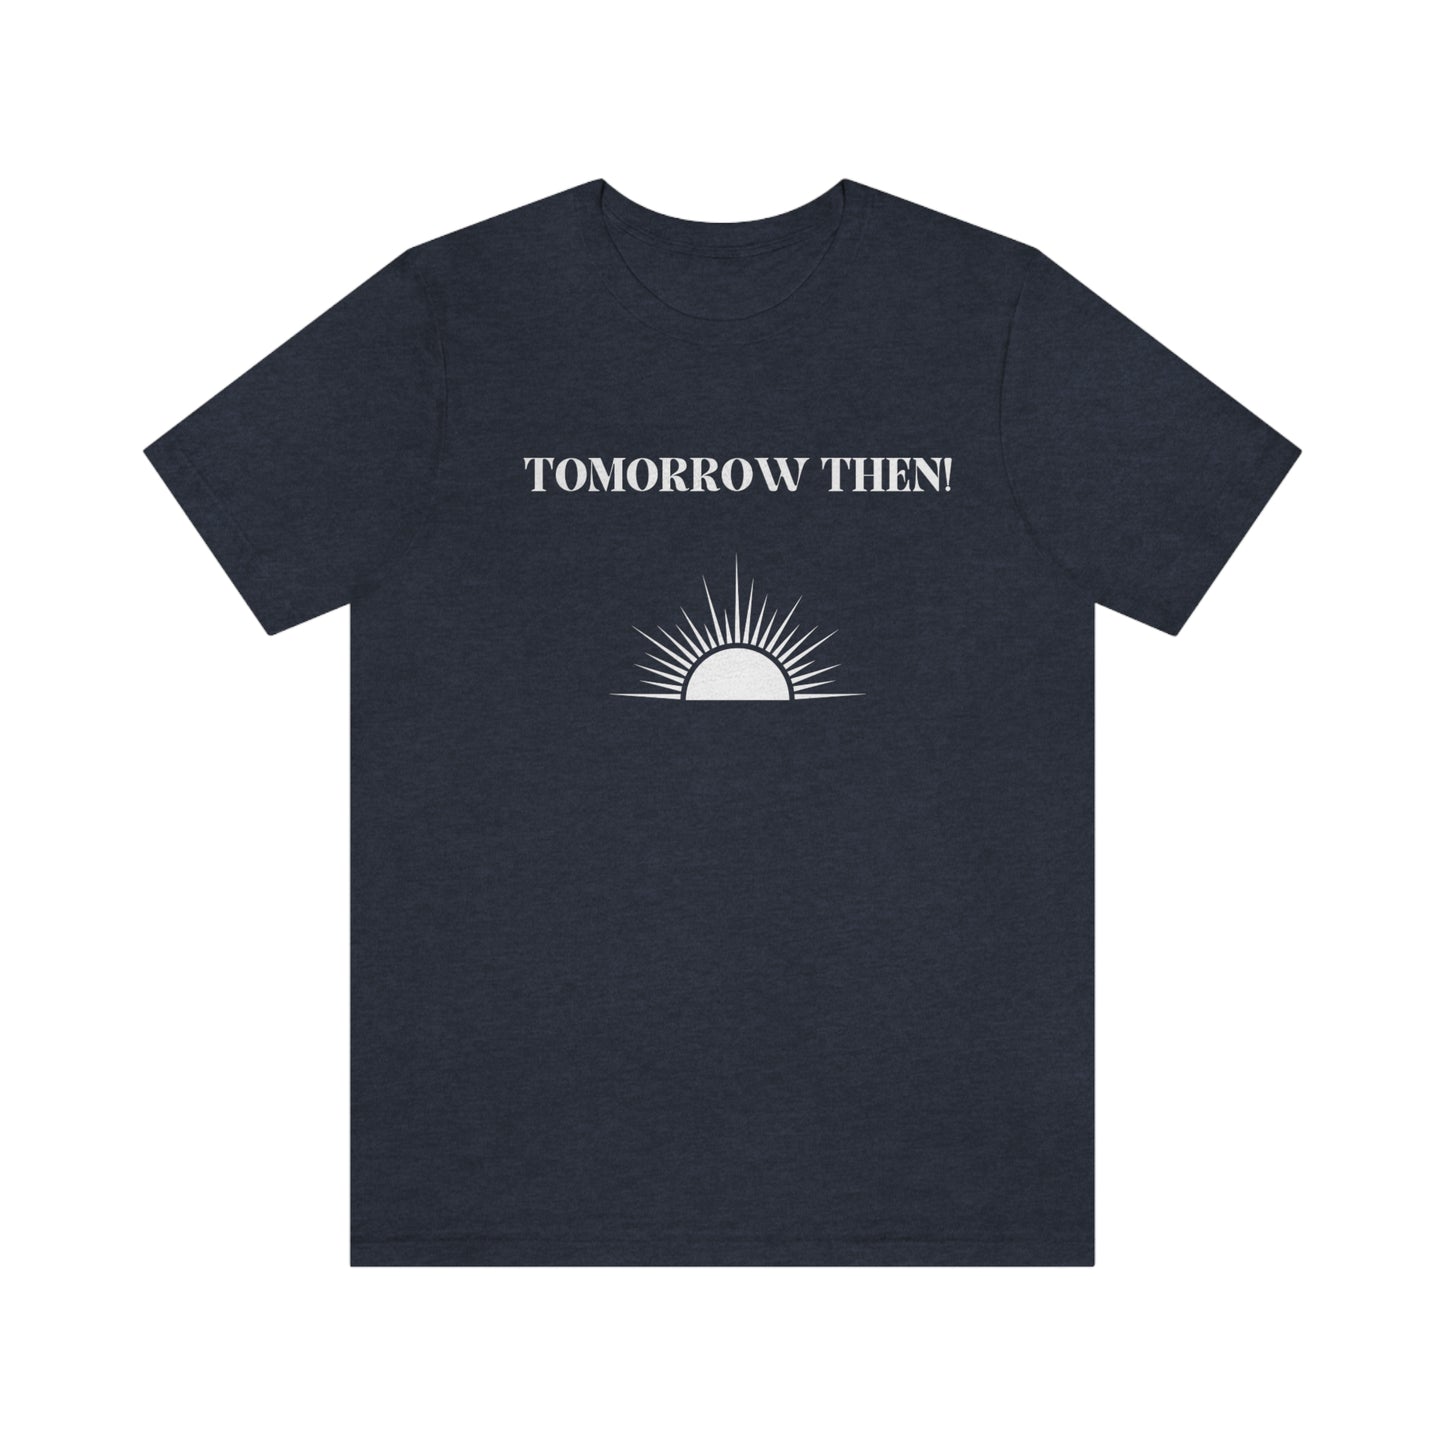 Tomorrow then t shirt, t shirt with inspirational words t shirts to encourage loved ones, tshirt gift for friends,hopeful affirmations